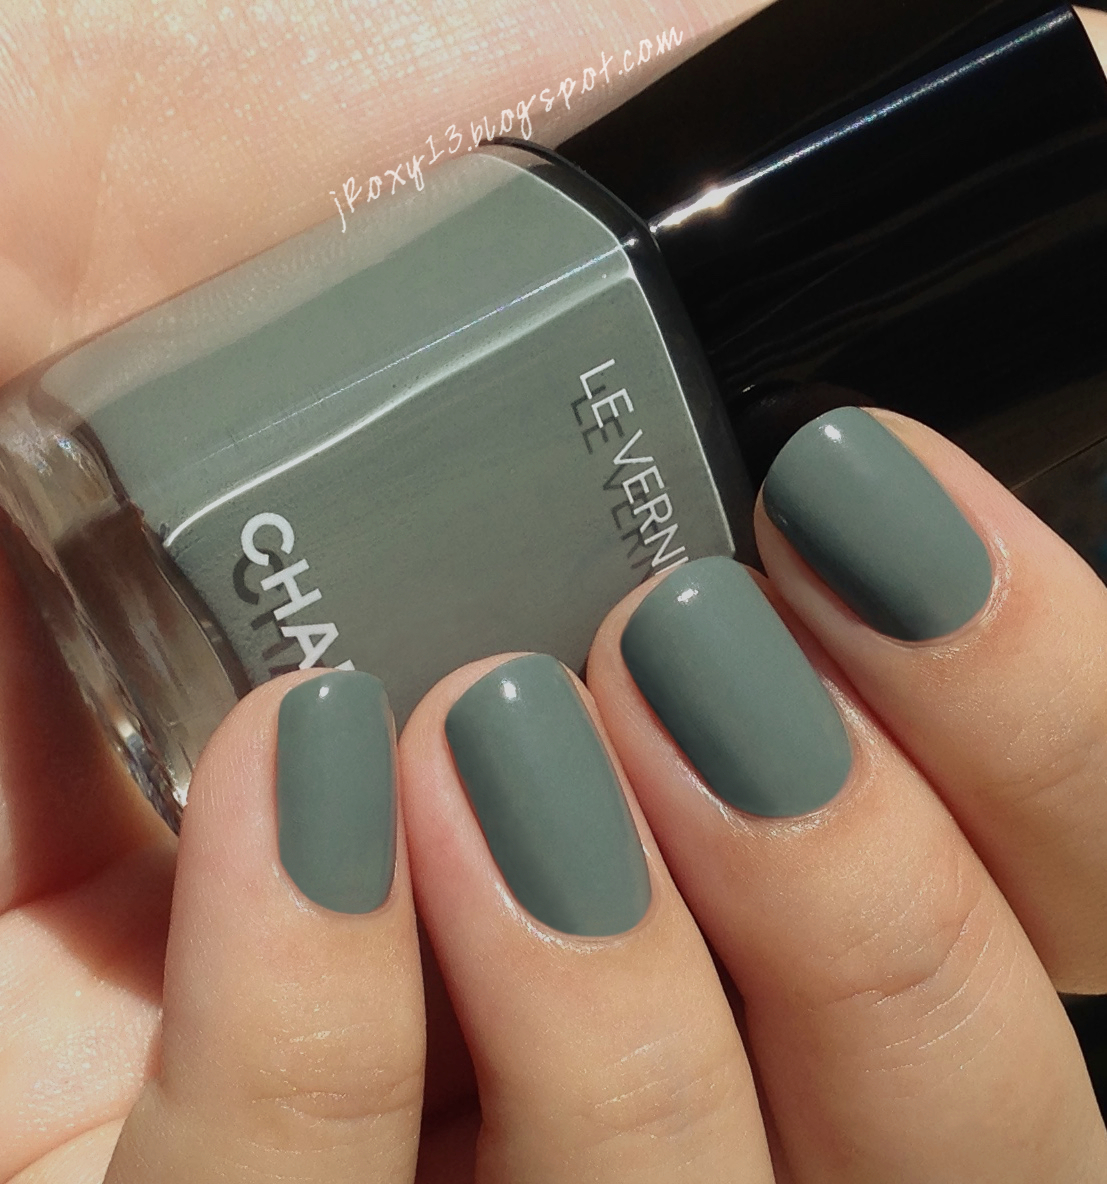 Chanel Holiday 2015 Le Vernis Nail Polish Swatches